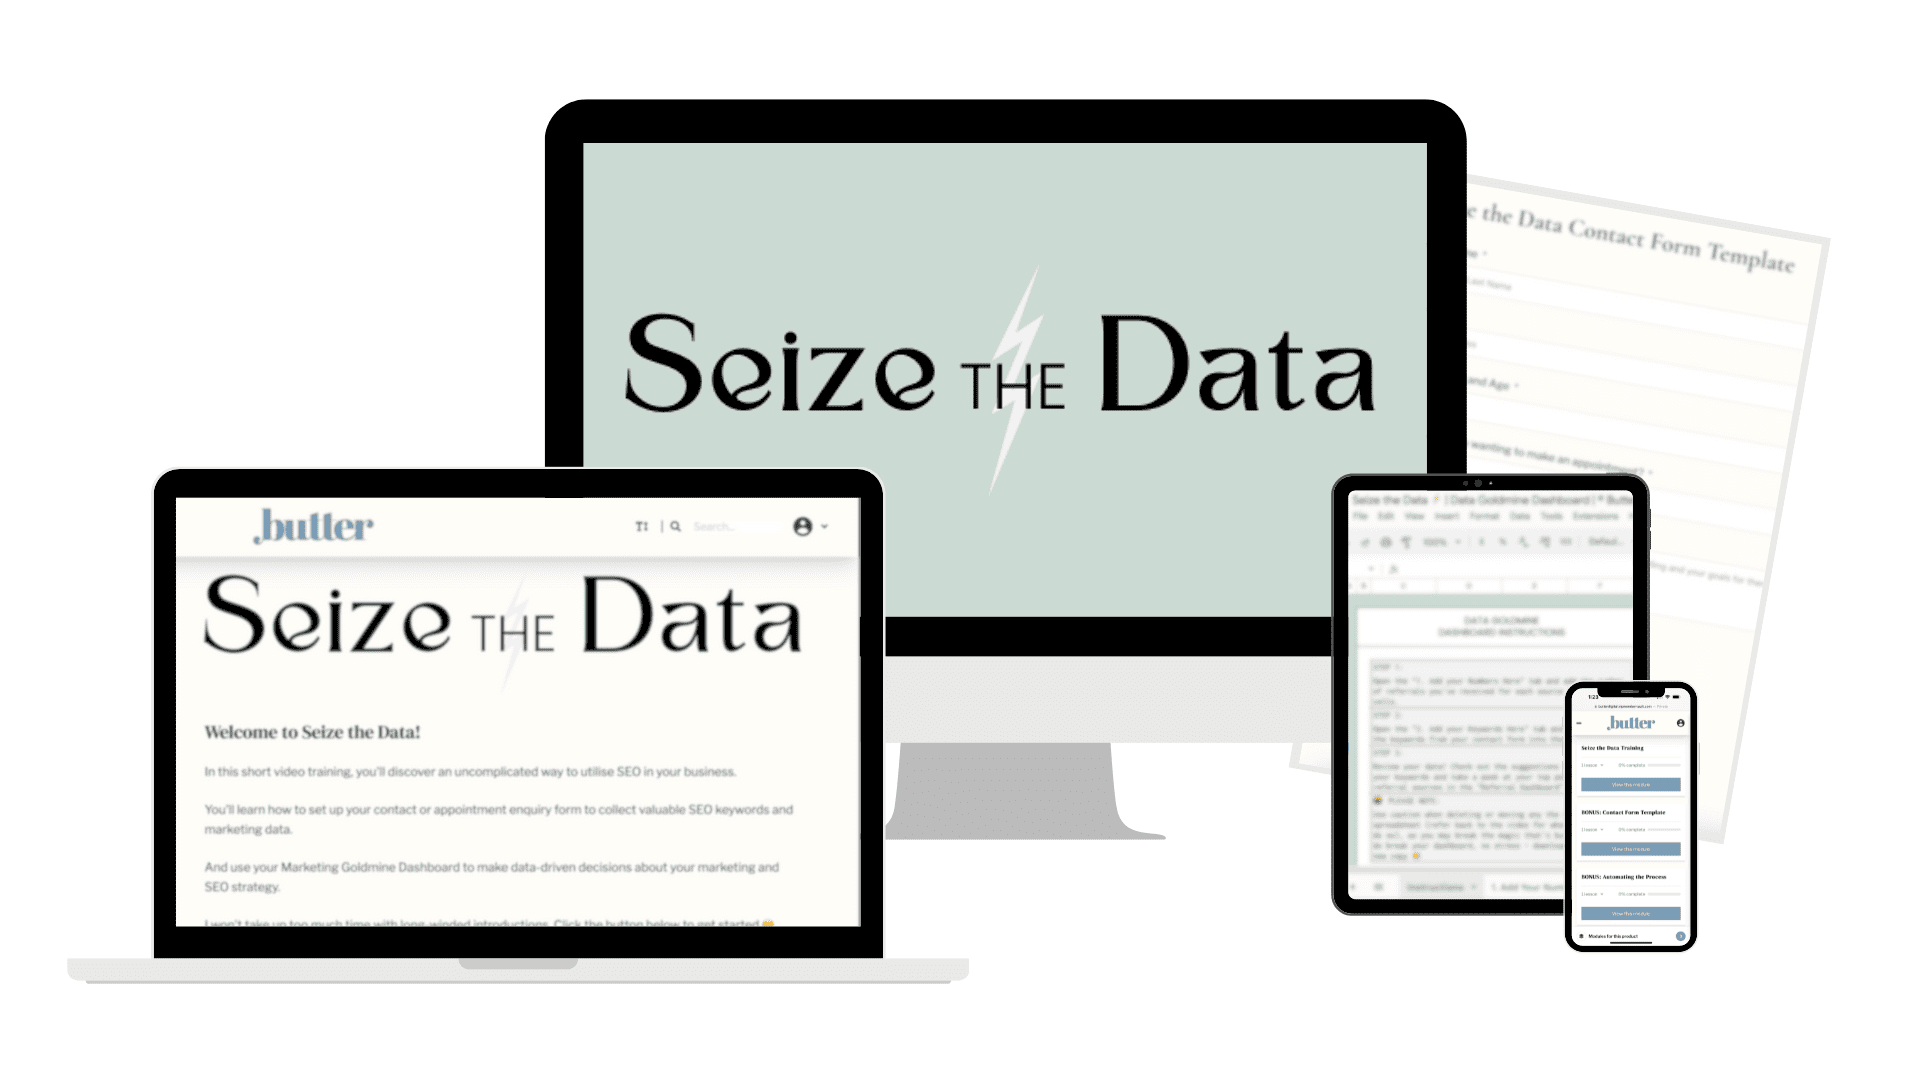 Seize the data mockup showing the course platform, Data Goldmine Dashboard, Contact Form Template and mobile access.